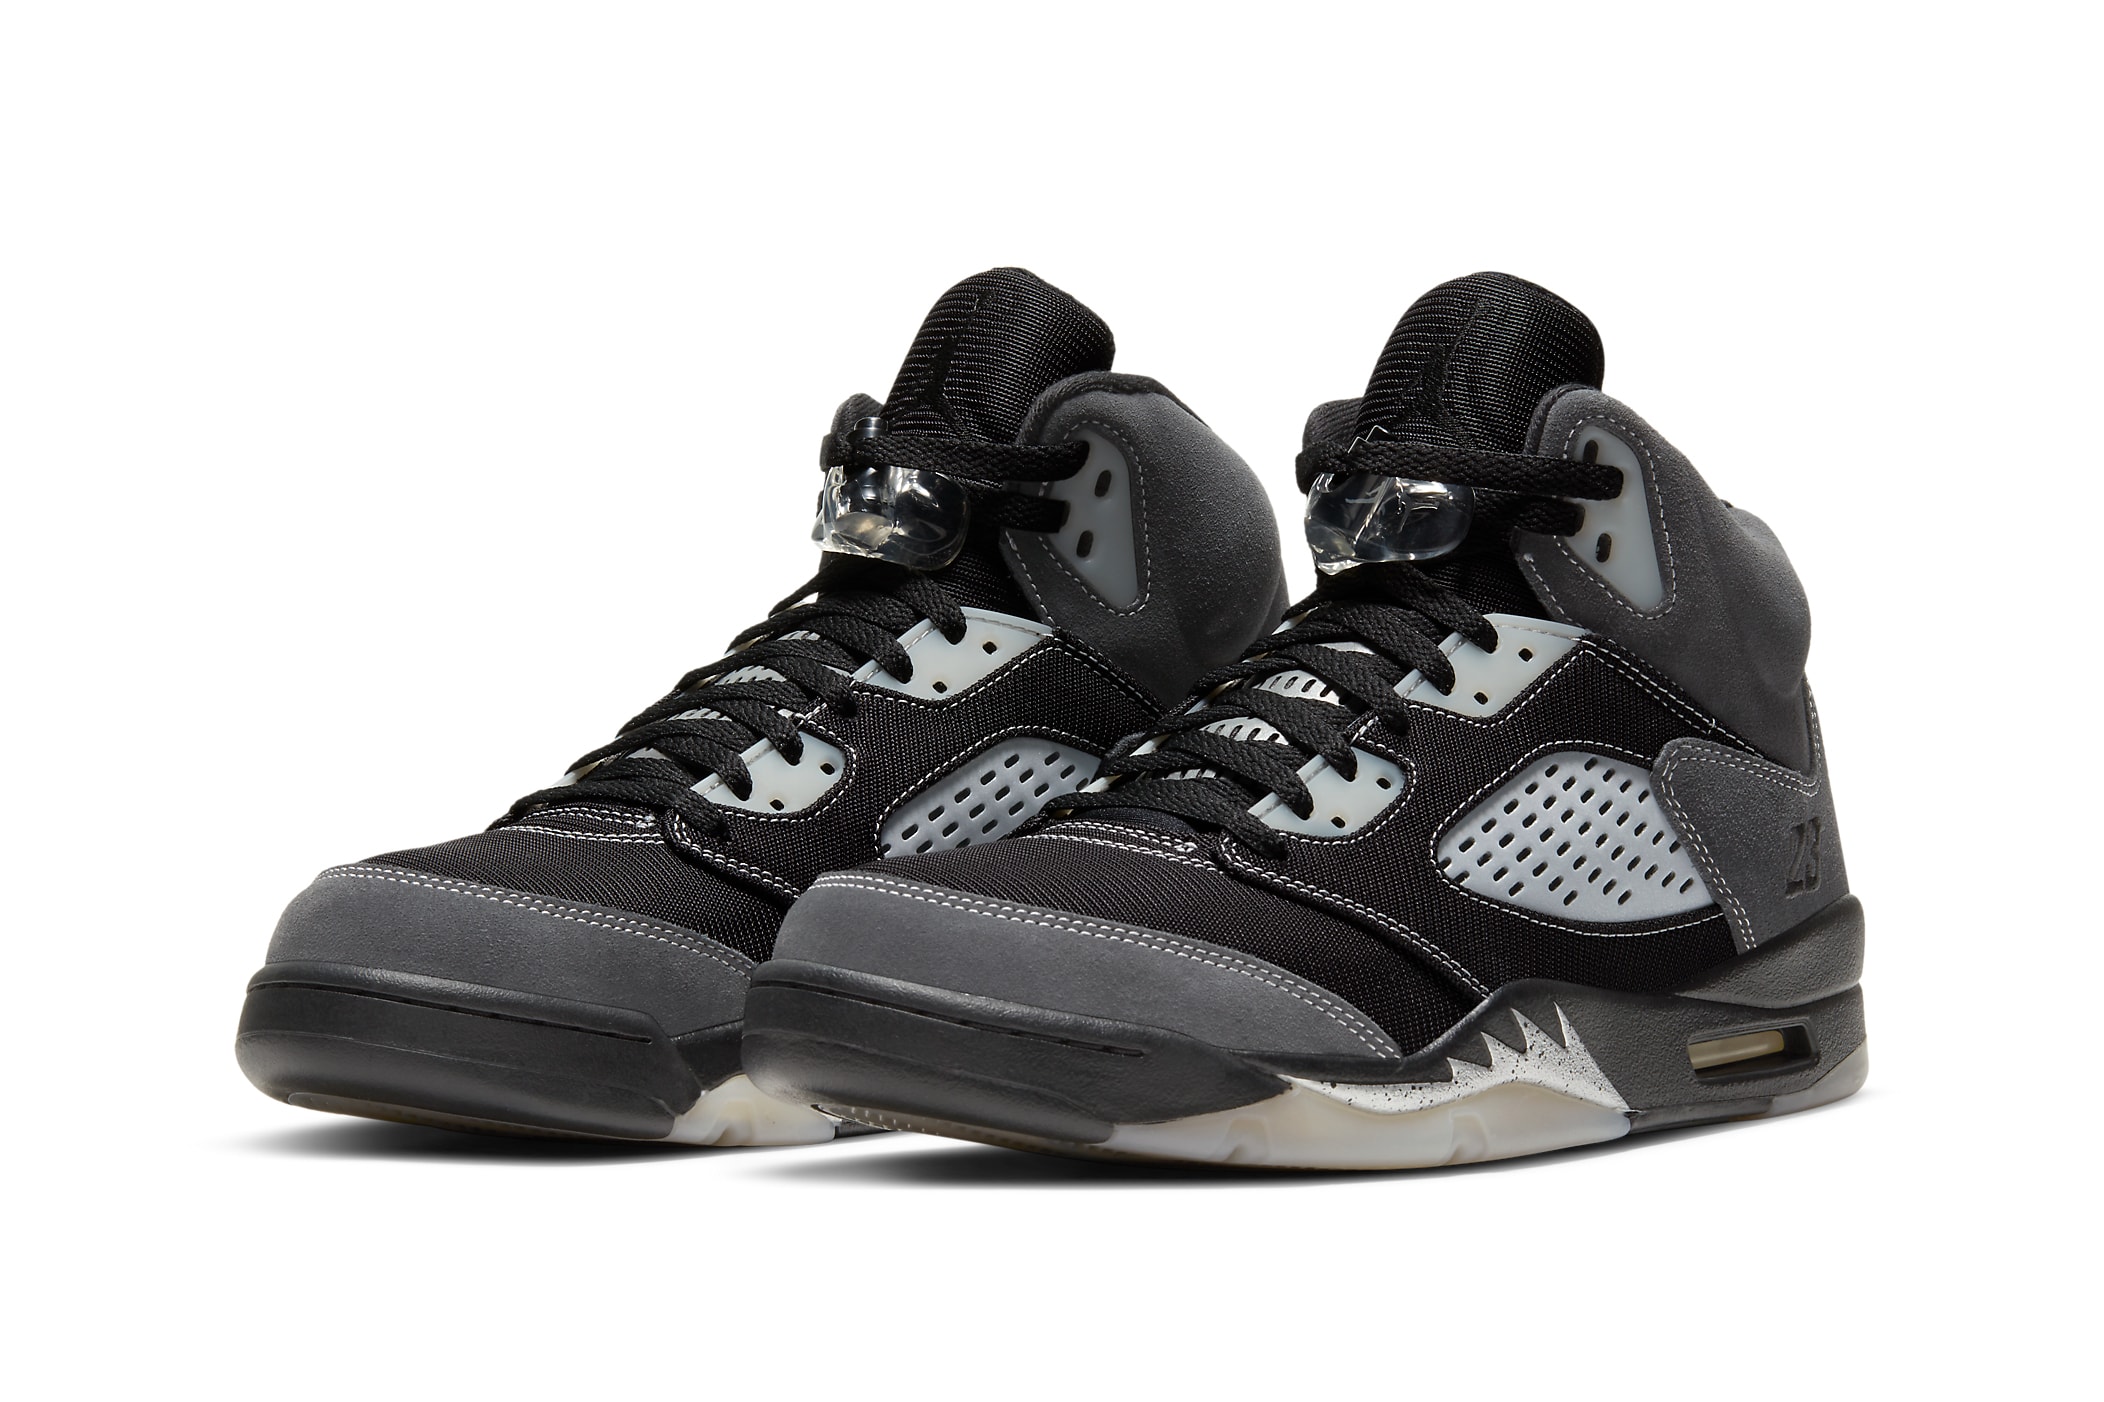 air jordan 5 anthracite DB0731 001 wolf grey clear black release date photos store list buying guide 